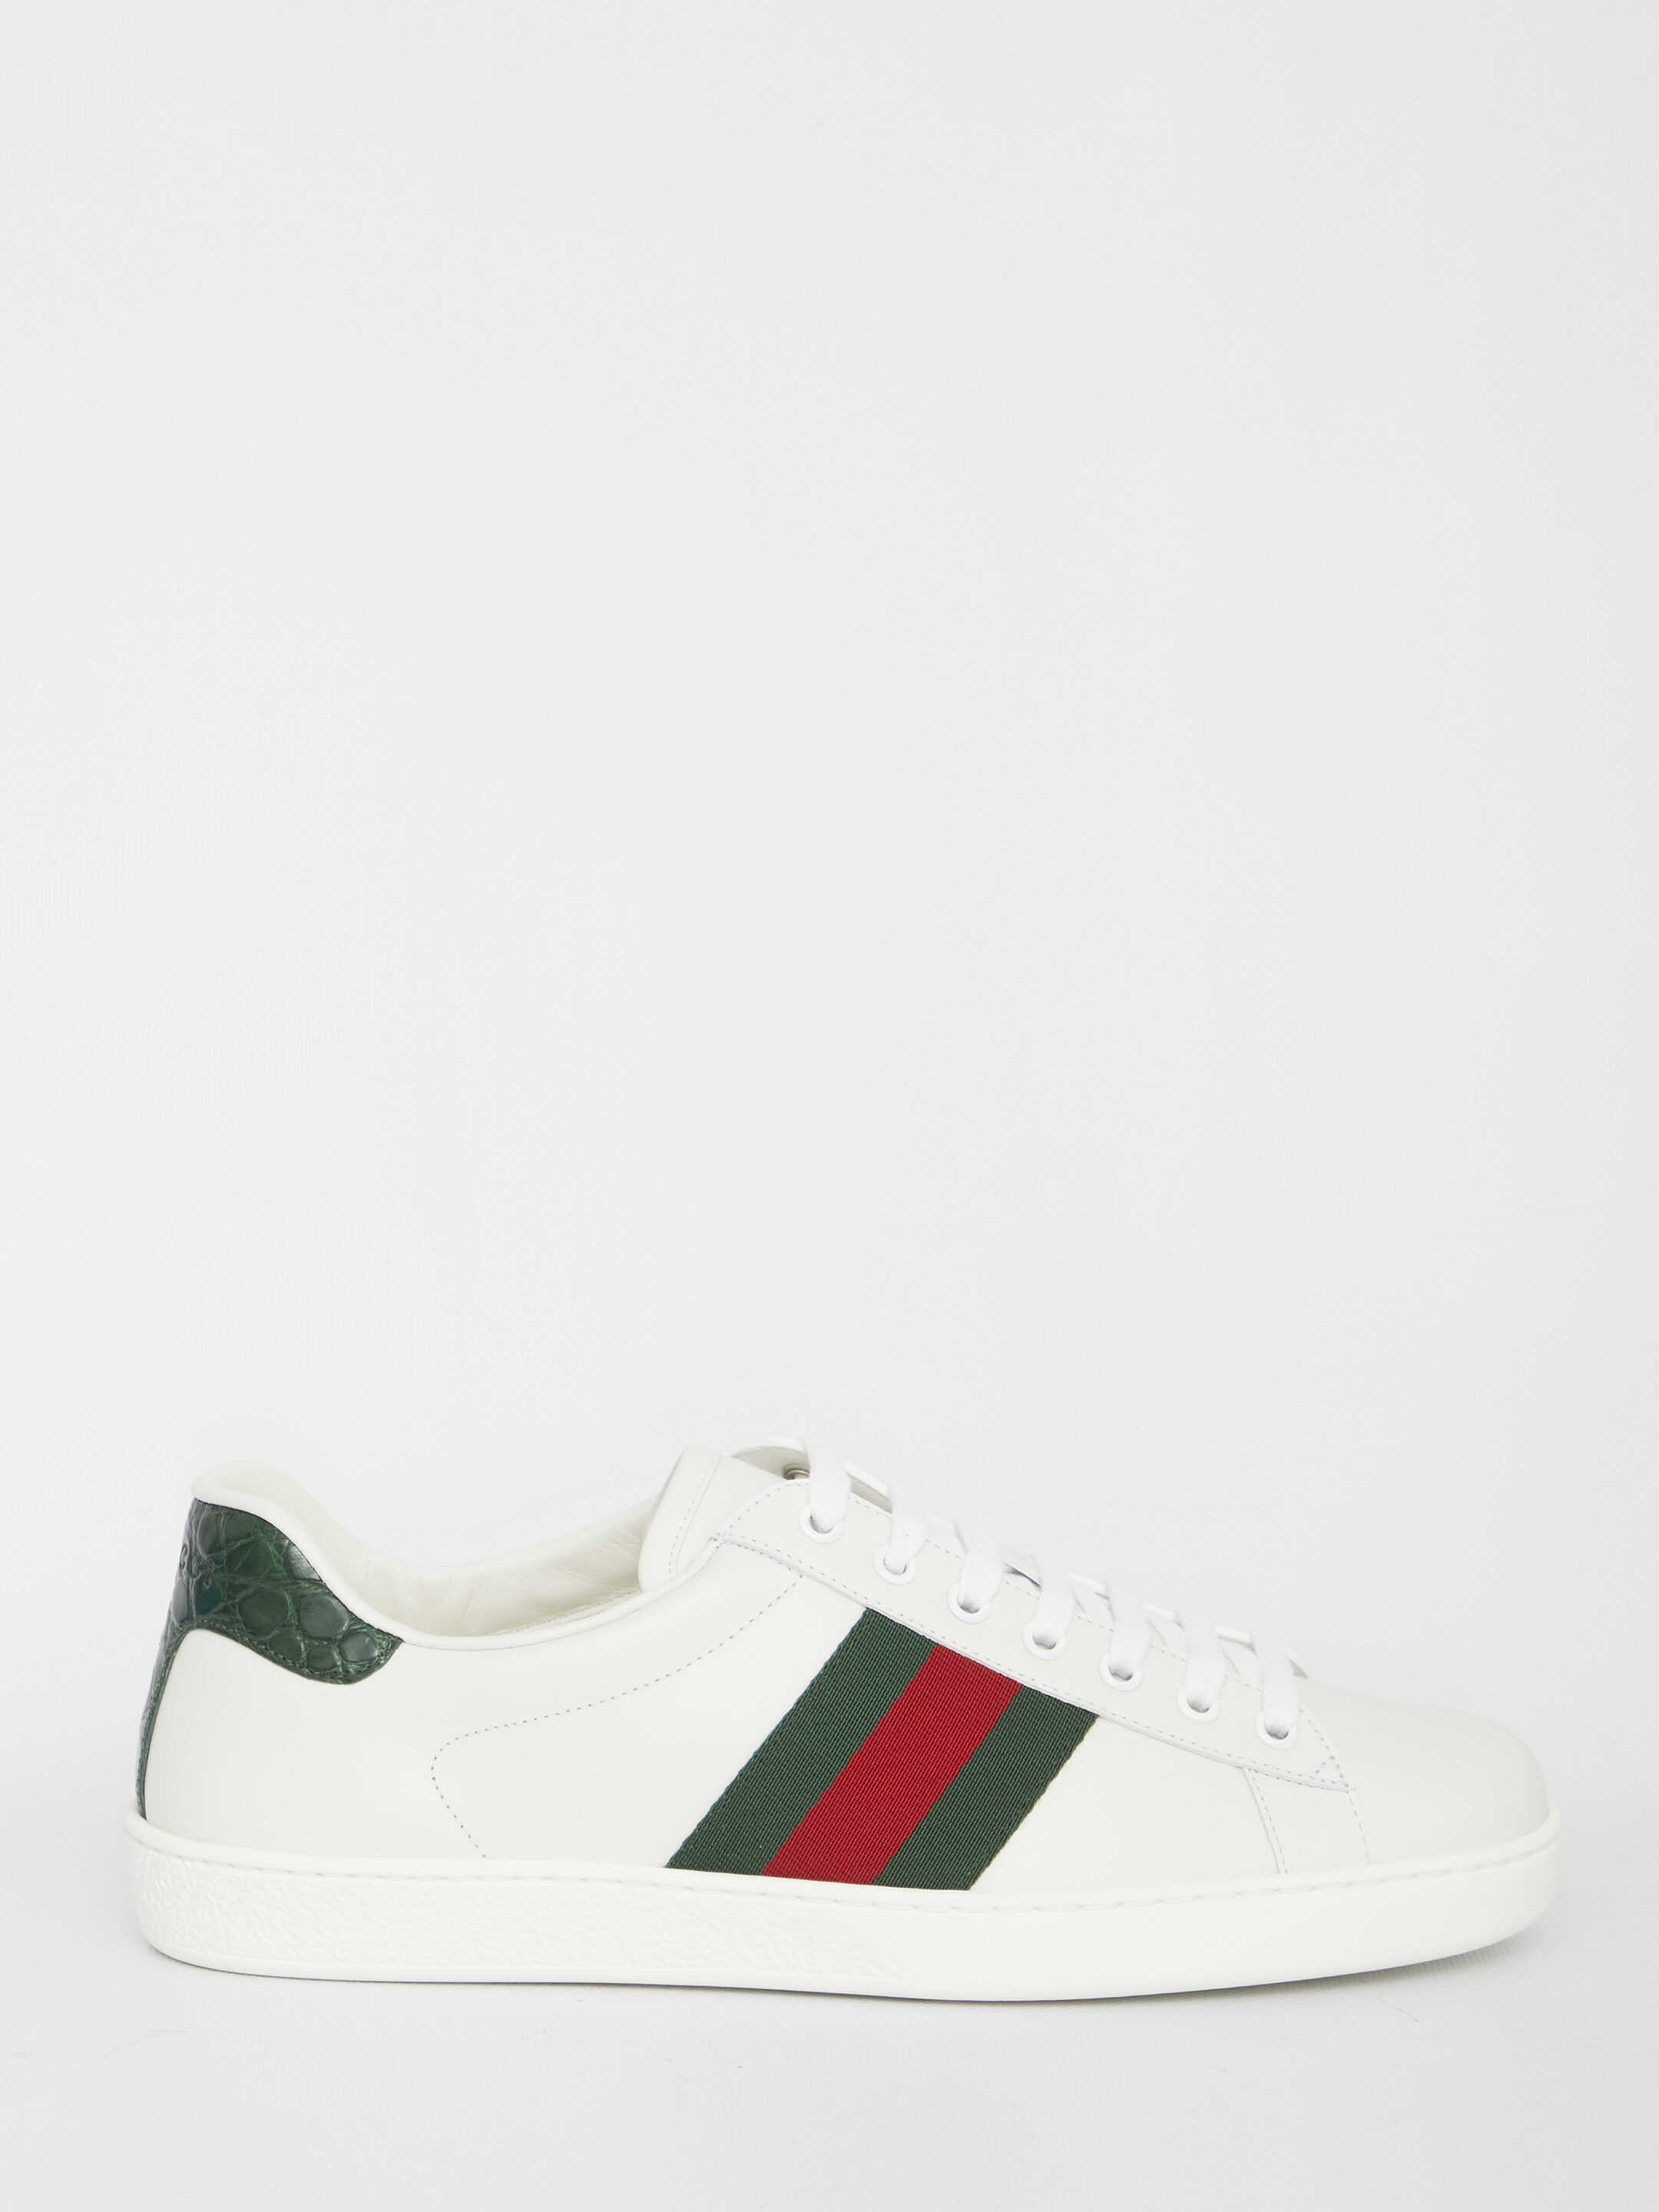 Gucci Ace Sneakers WHITE